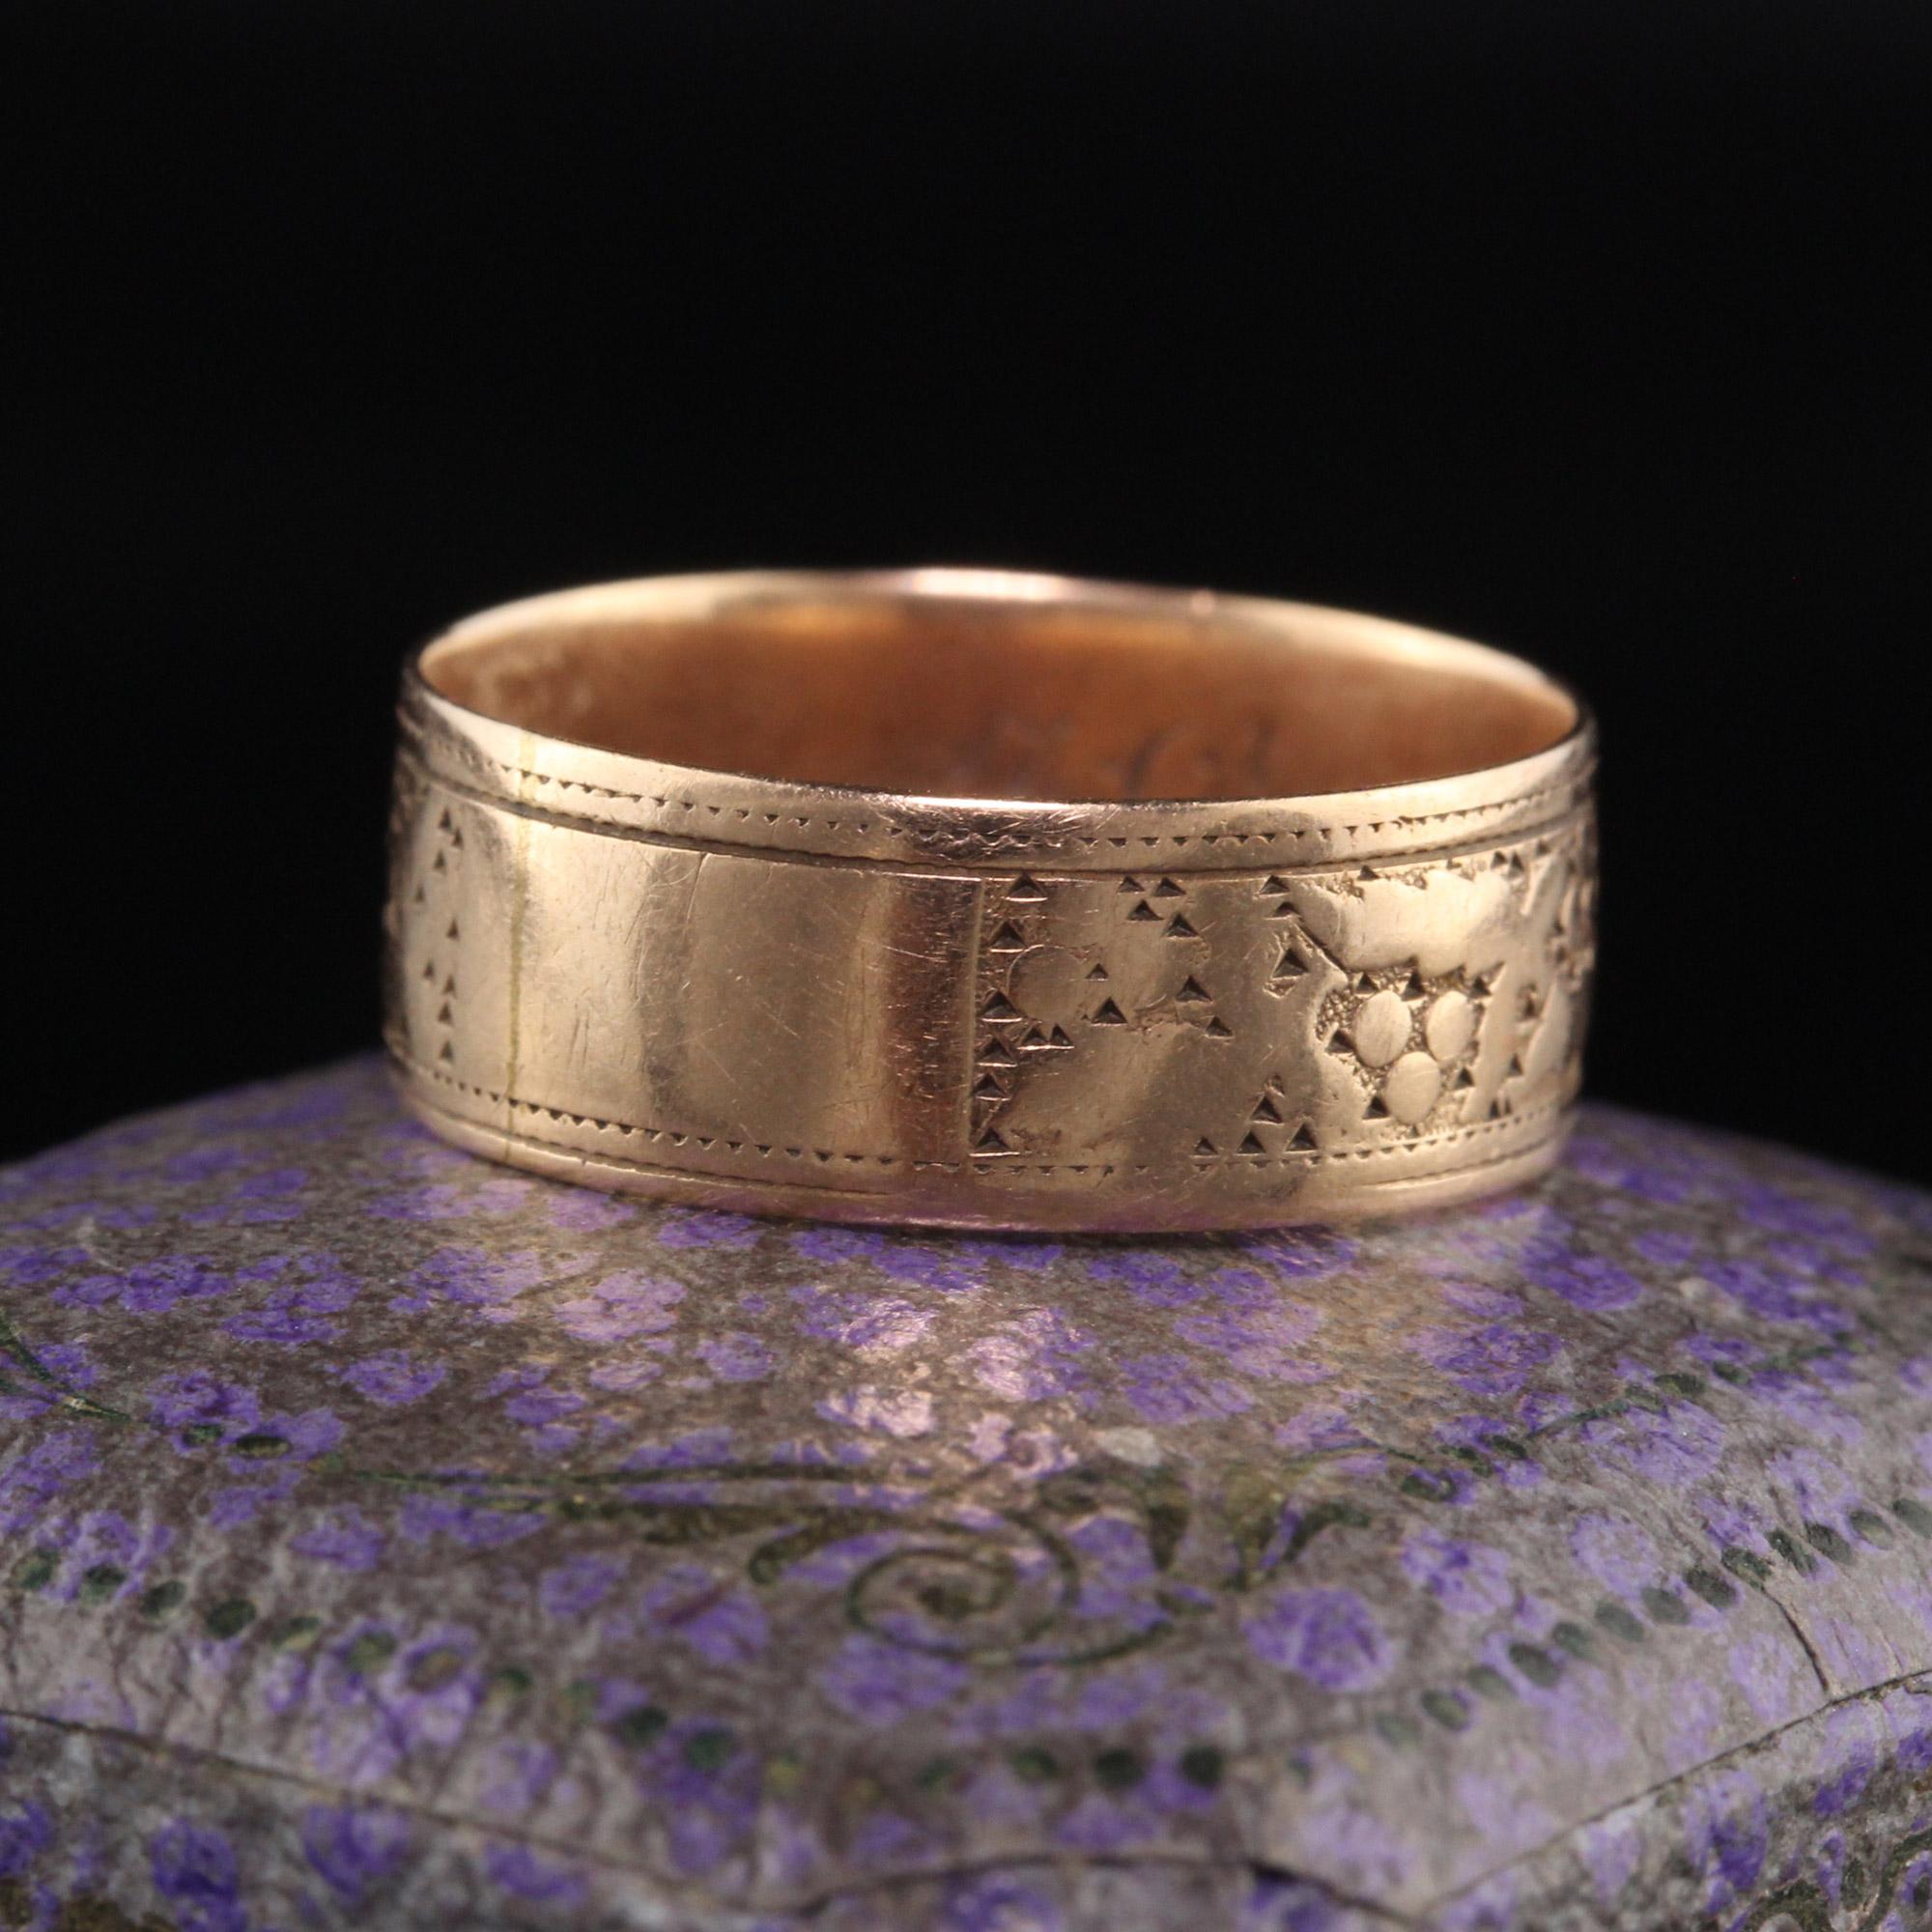 Beautiful Antique Victorian 14K Rose Gold Engraved Wide Wedding Band. This beautiful wedding band is crafted in 14K rose gold and has an interesting engraved design going around the entire ring.

Item #R1190

Metal: 14K Rose Gold

Weight: 2.5